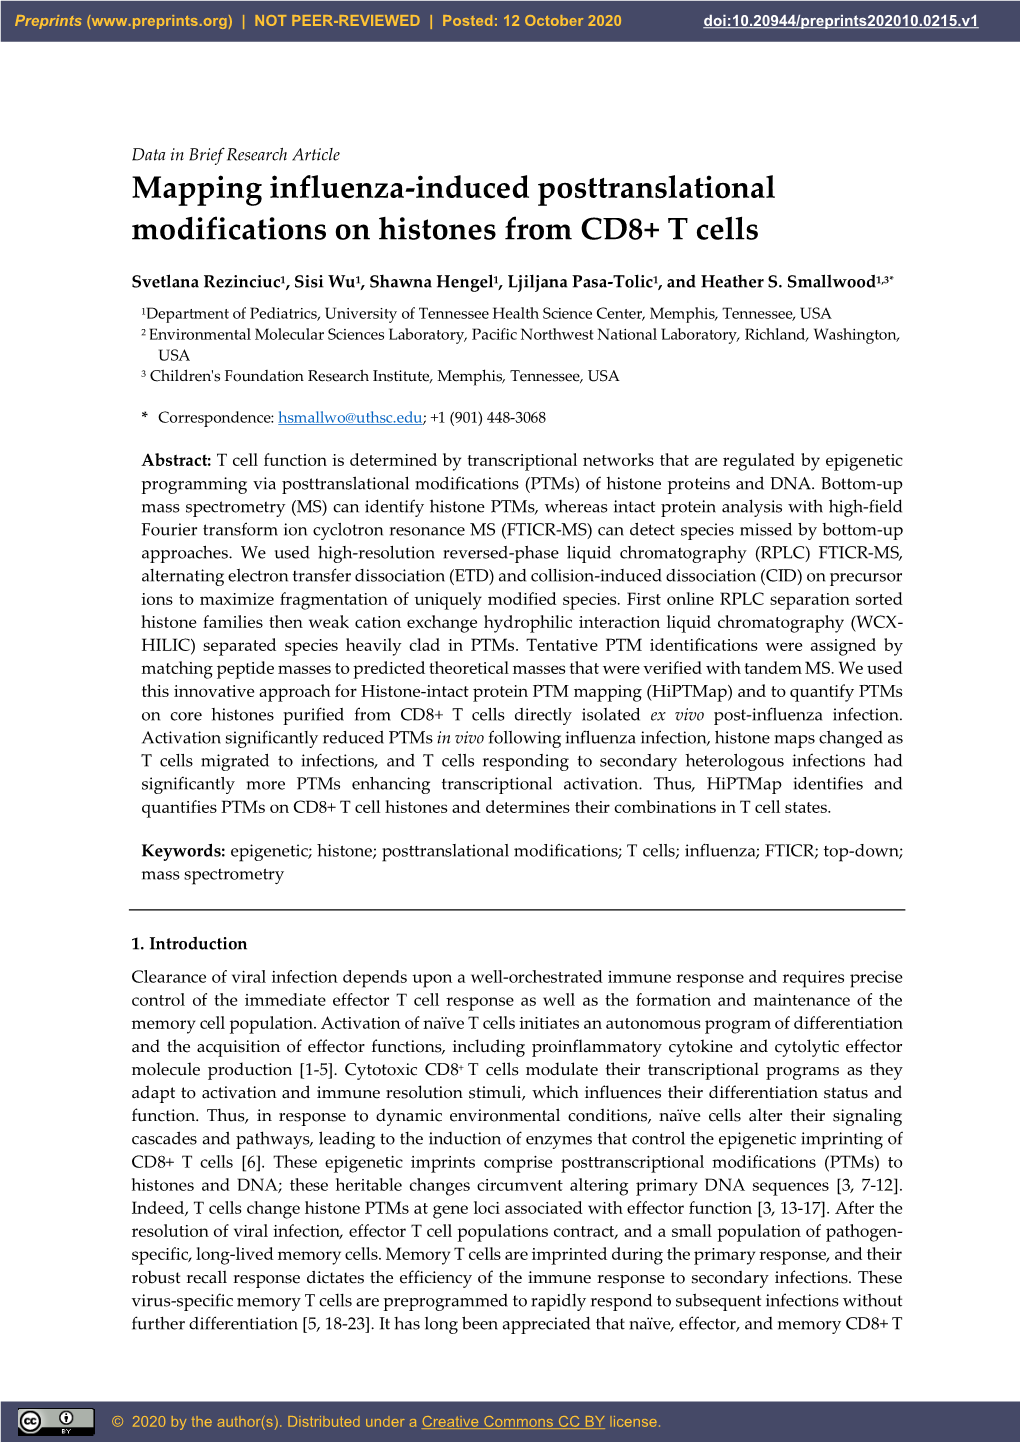 Mapping Influenza-Induced Posttranslational Modifications on Histones from CD8+ T Cells